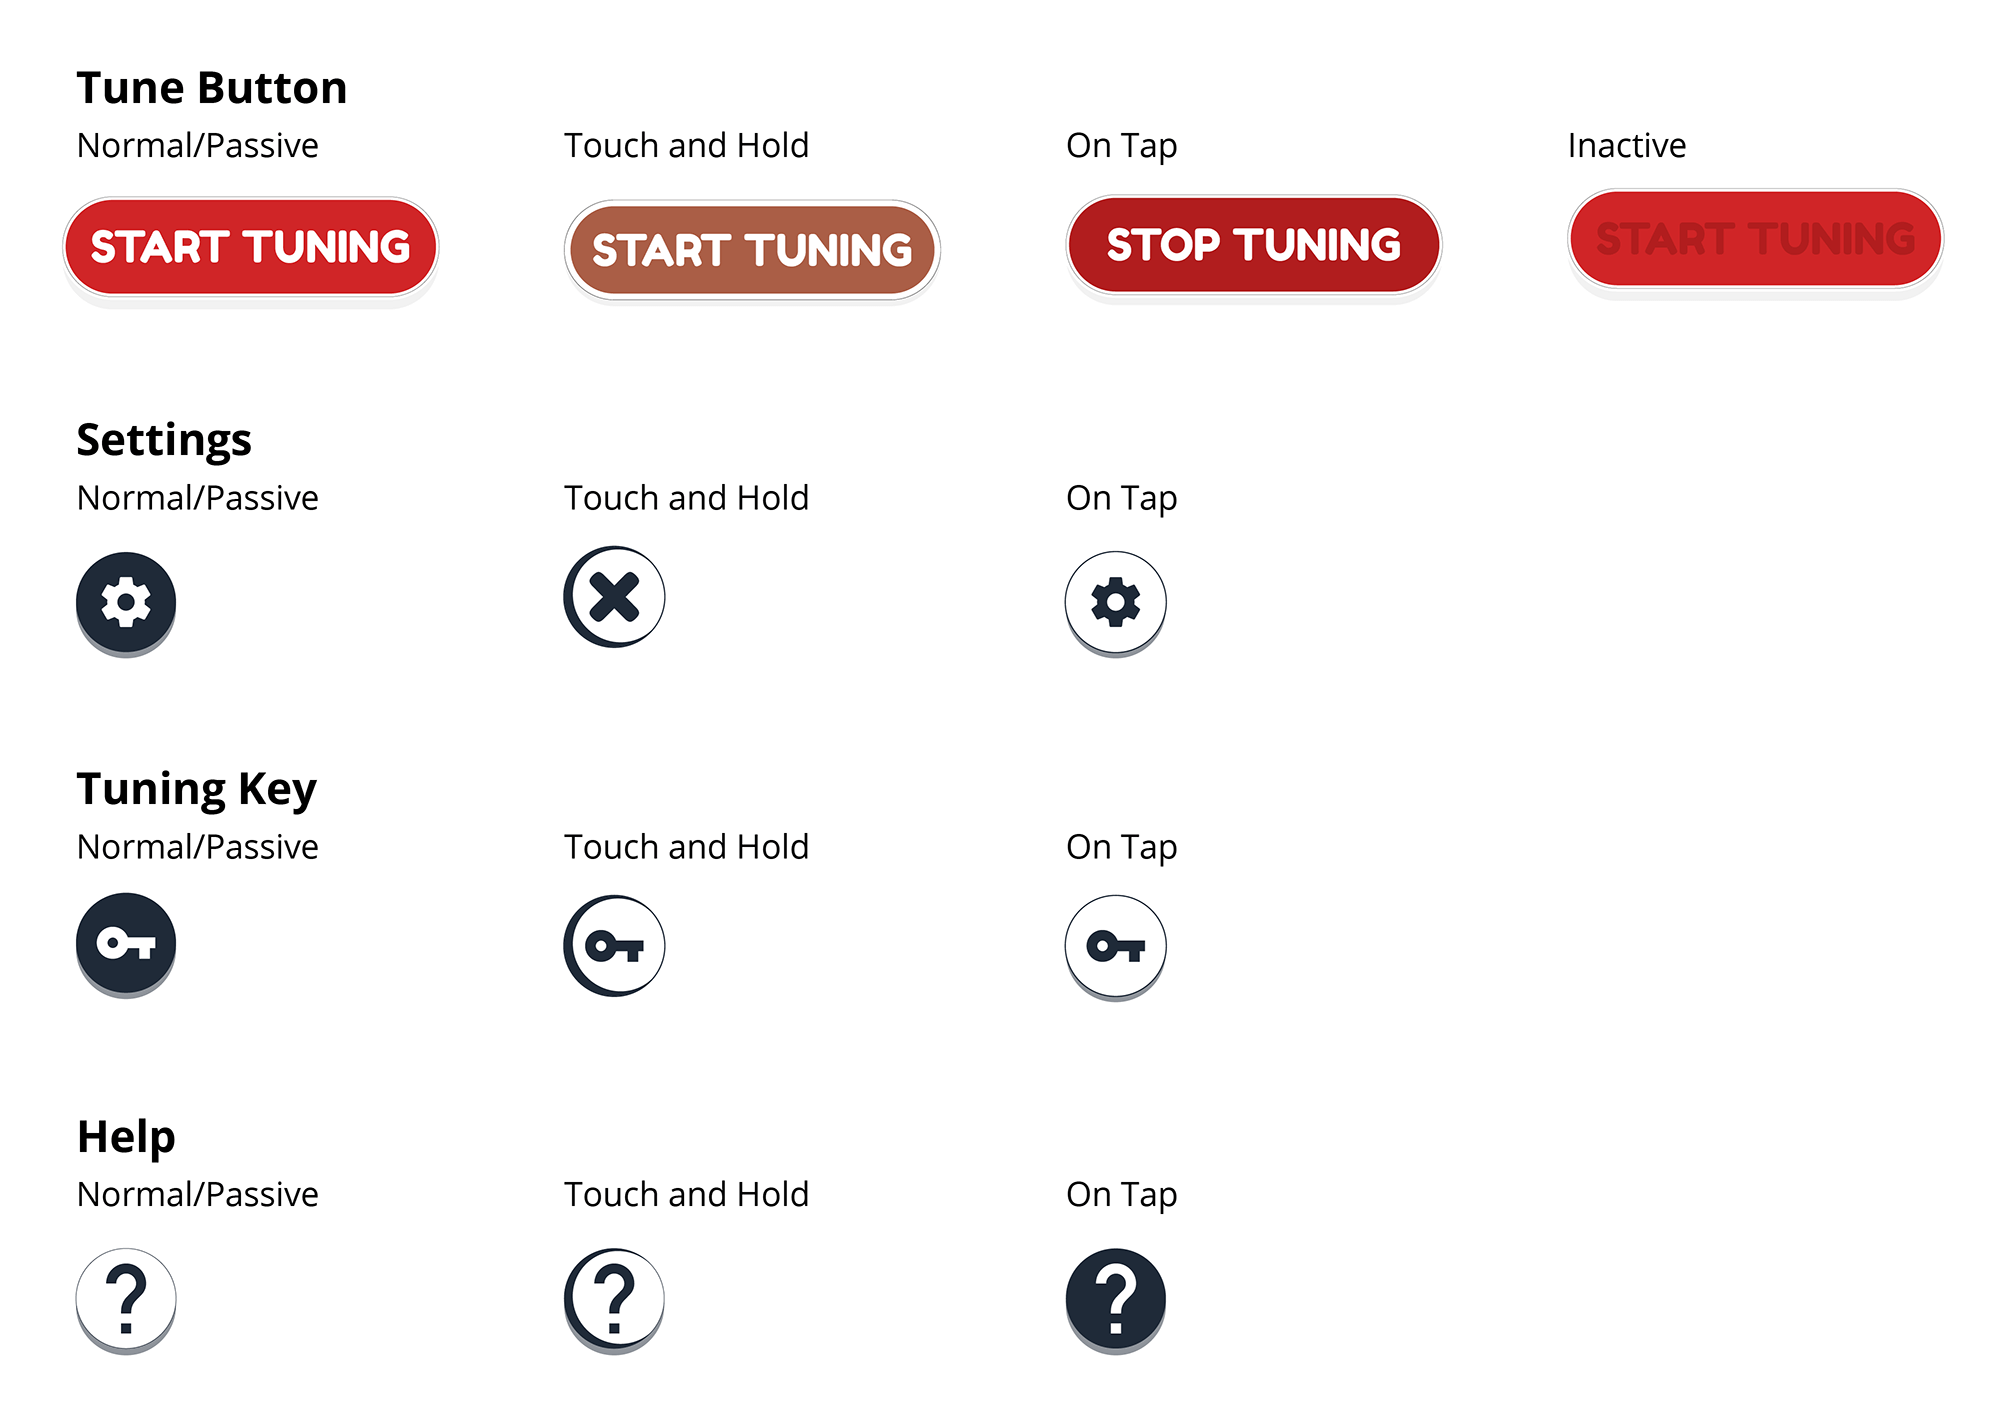 A mock up showing the initial designs and properties of the buttons to be used in the application